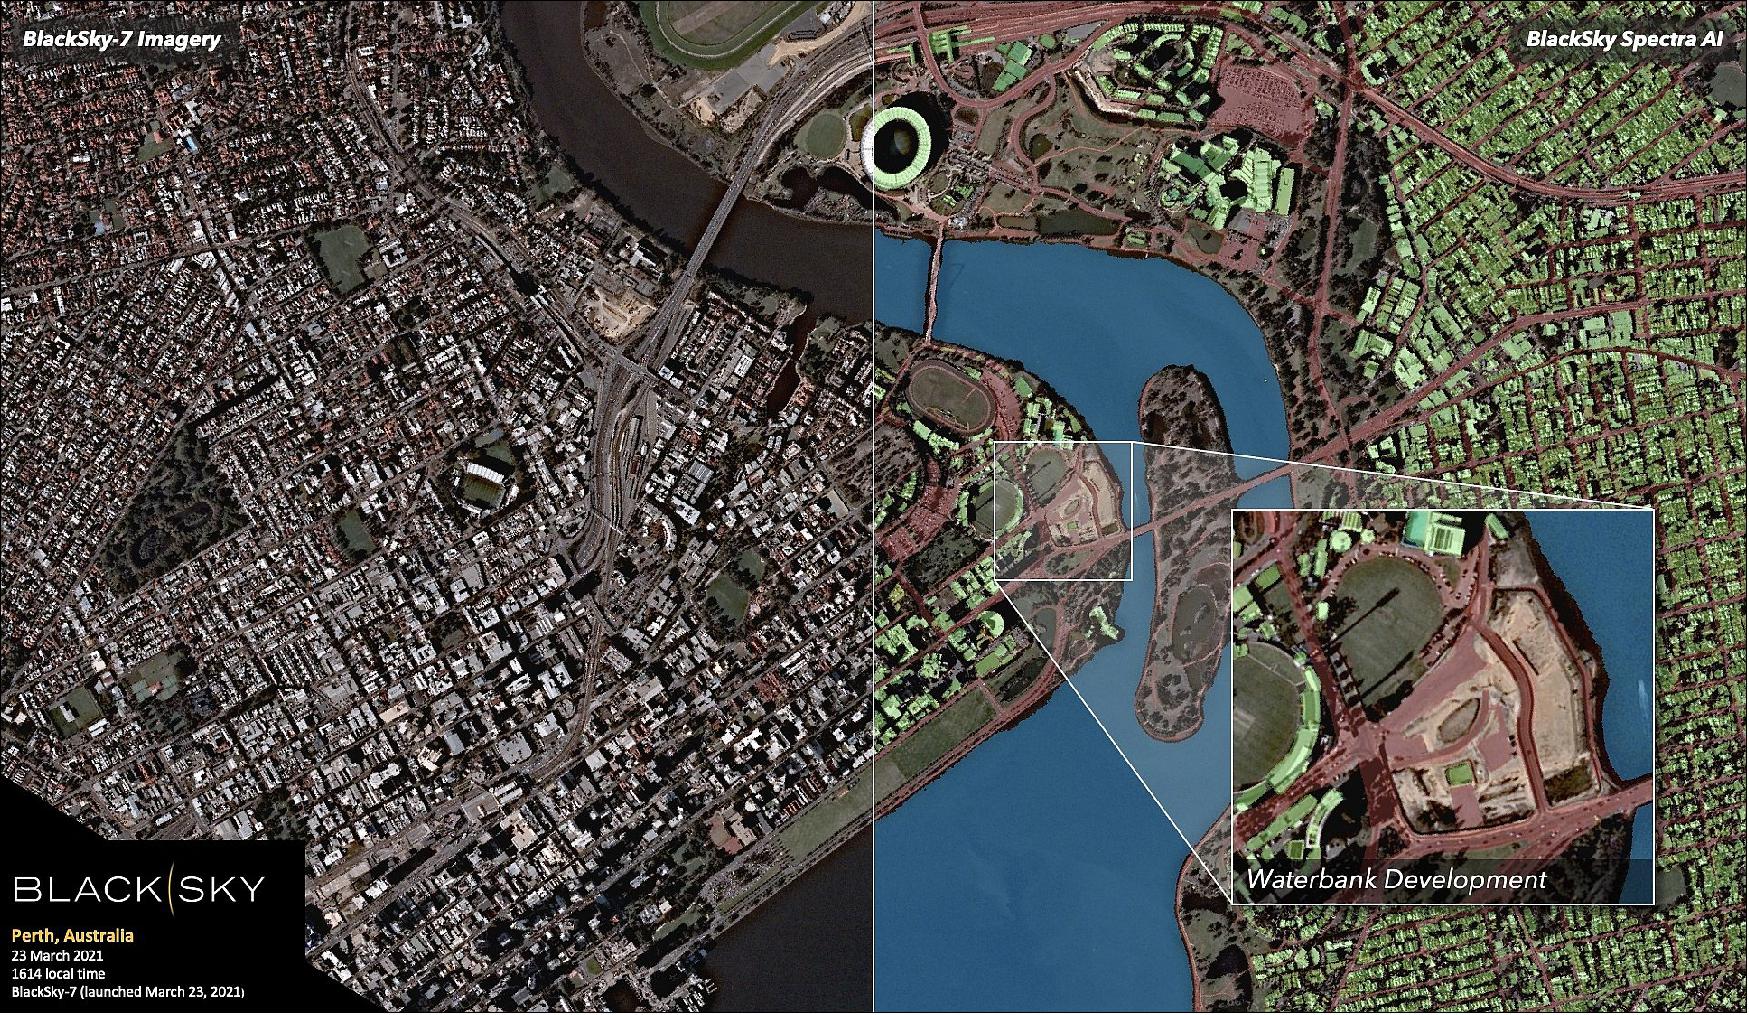 Figure 14: BlackSky's Spectra AI combines the power of high-resolution satellite imagery with AI/ML techniques to automatically create detailed maps indicating activity along roads, buildings, waterways, construction sites, and more (image credit: BlackSky)